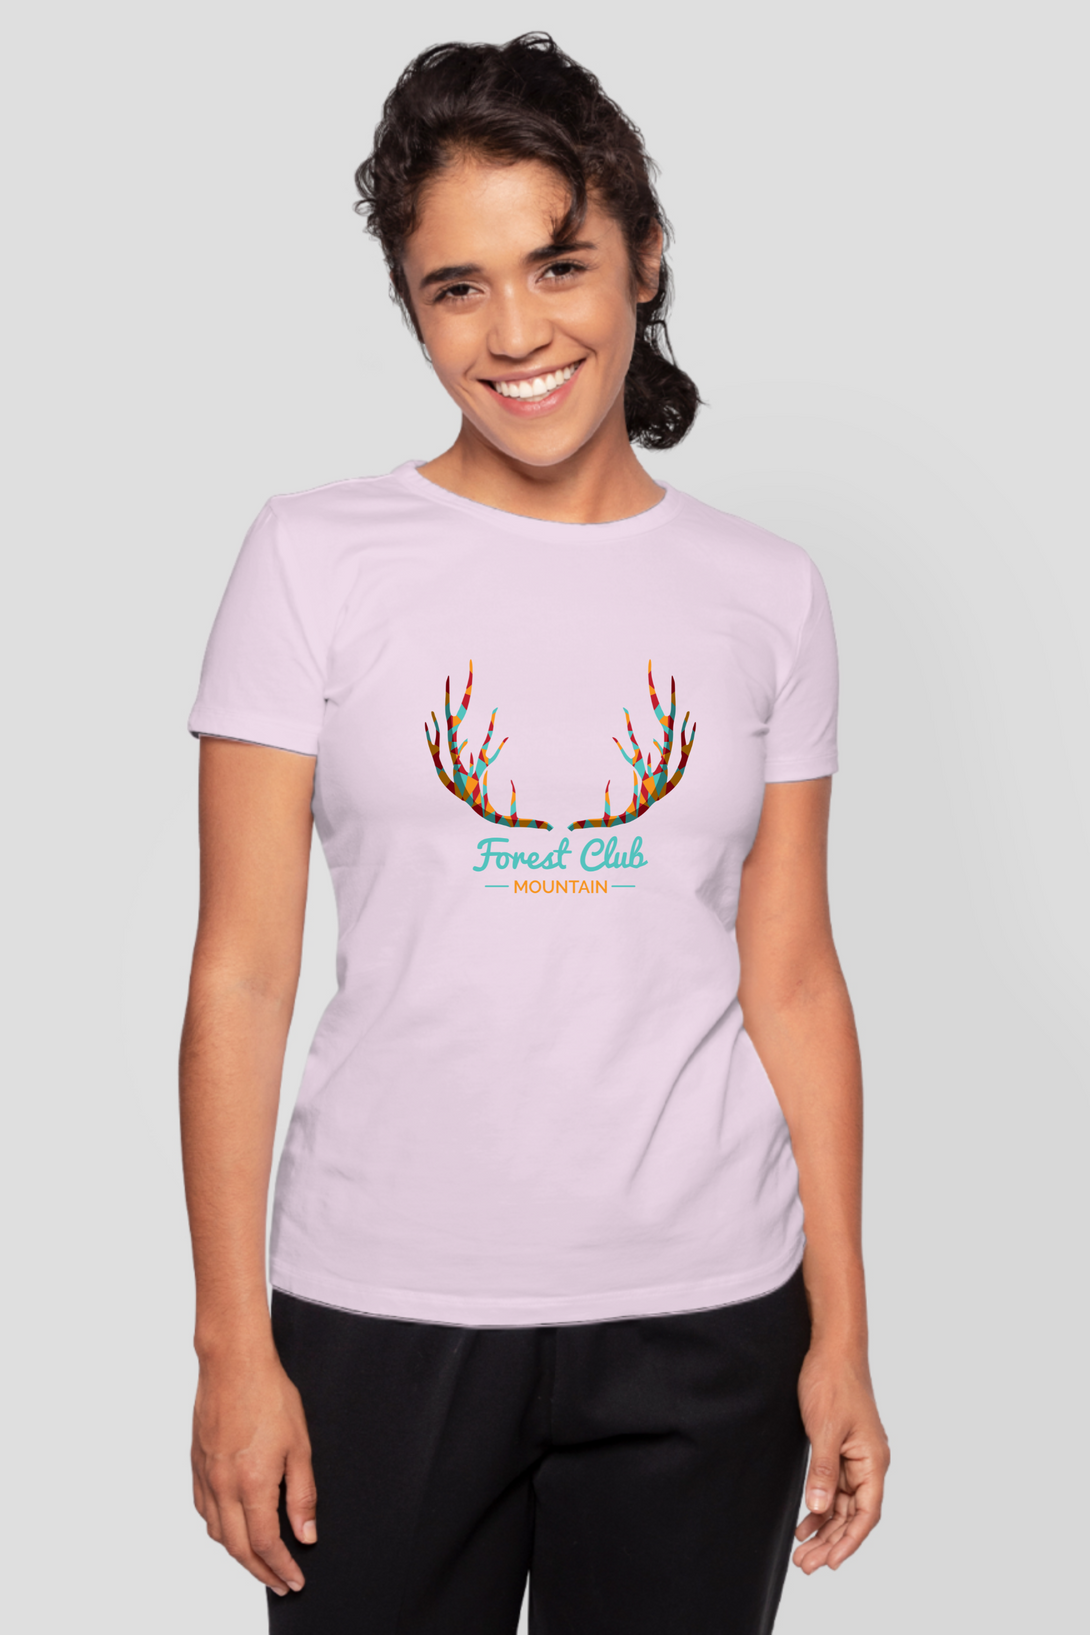 Forest Club Printed T-Shirt For Women - WowWaves - 13